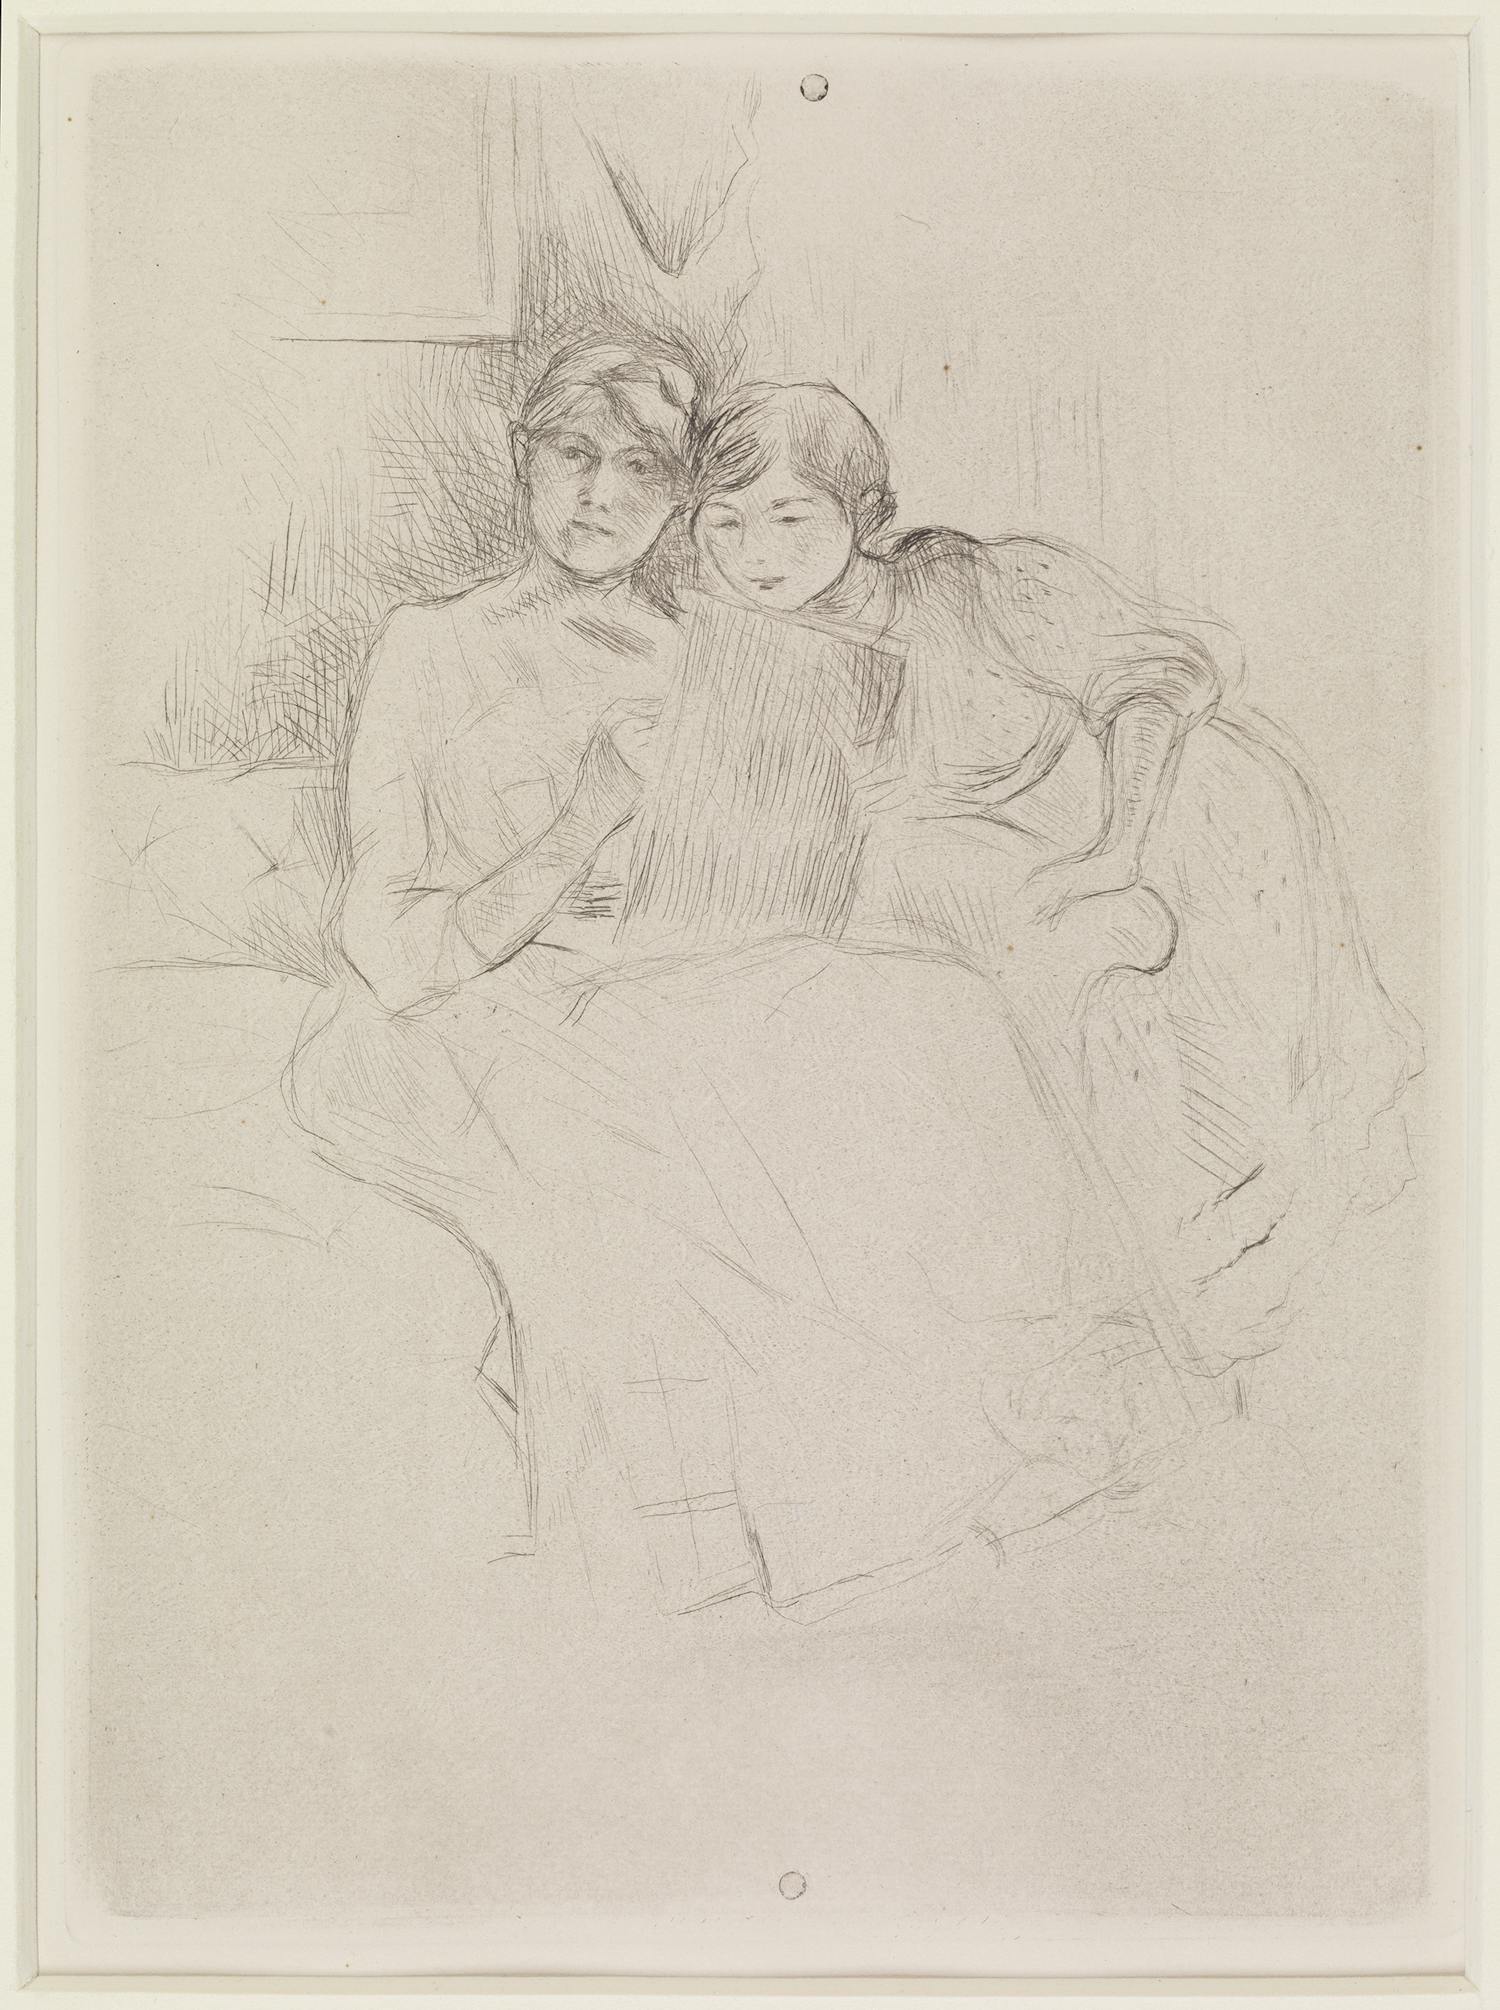 [ID: The image shows a drawing of a woman wearing a long dress. She is sitting on a sofa, looking directly out at us, and holds a sheet of paper. A child is standing on her left, peeking at the sheet of paper over the woman’s shoulder. End of ID]